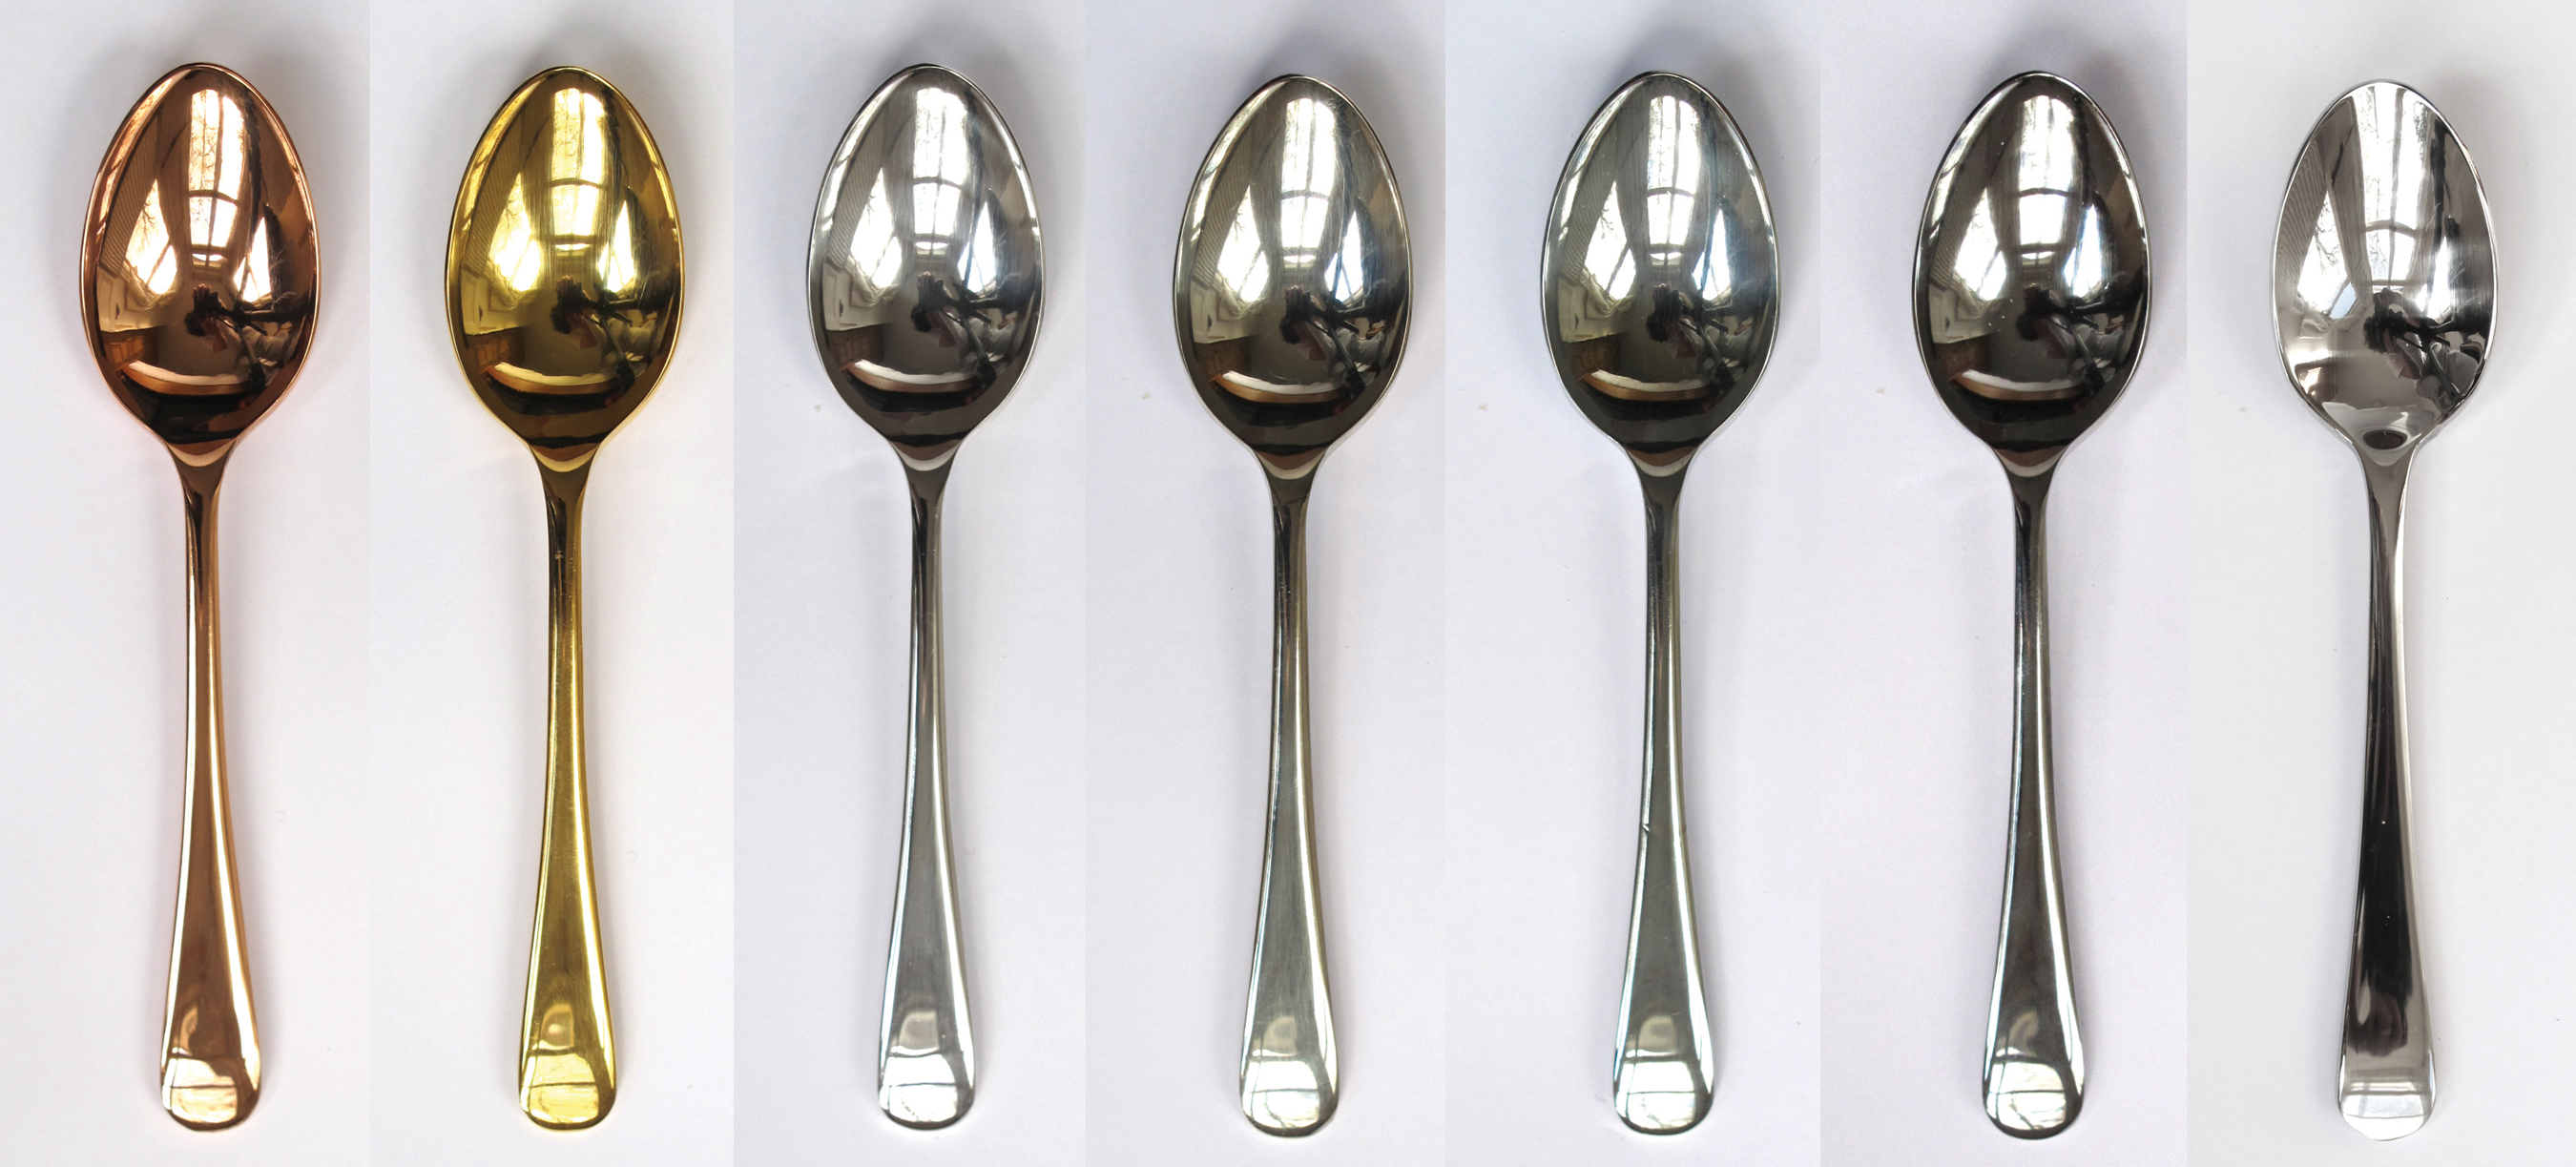 The Golden Spoon. How eating utensils change the taste of… | by Nicola  Twilley | re:form | Medium